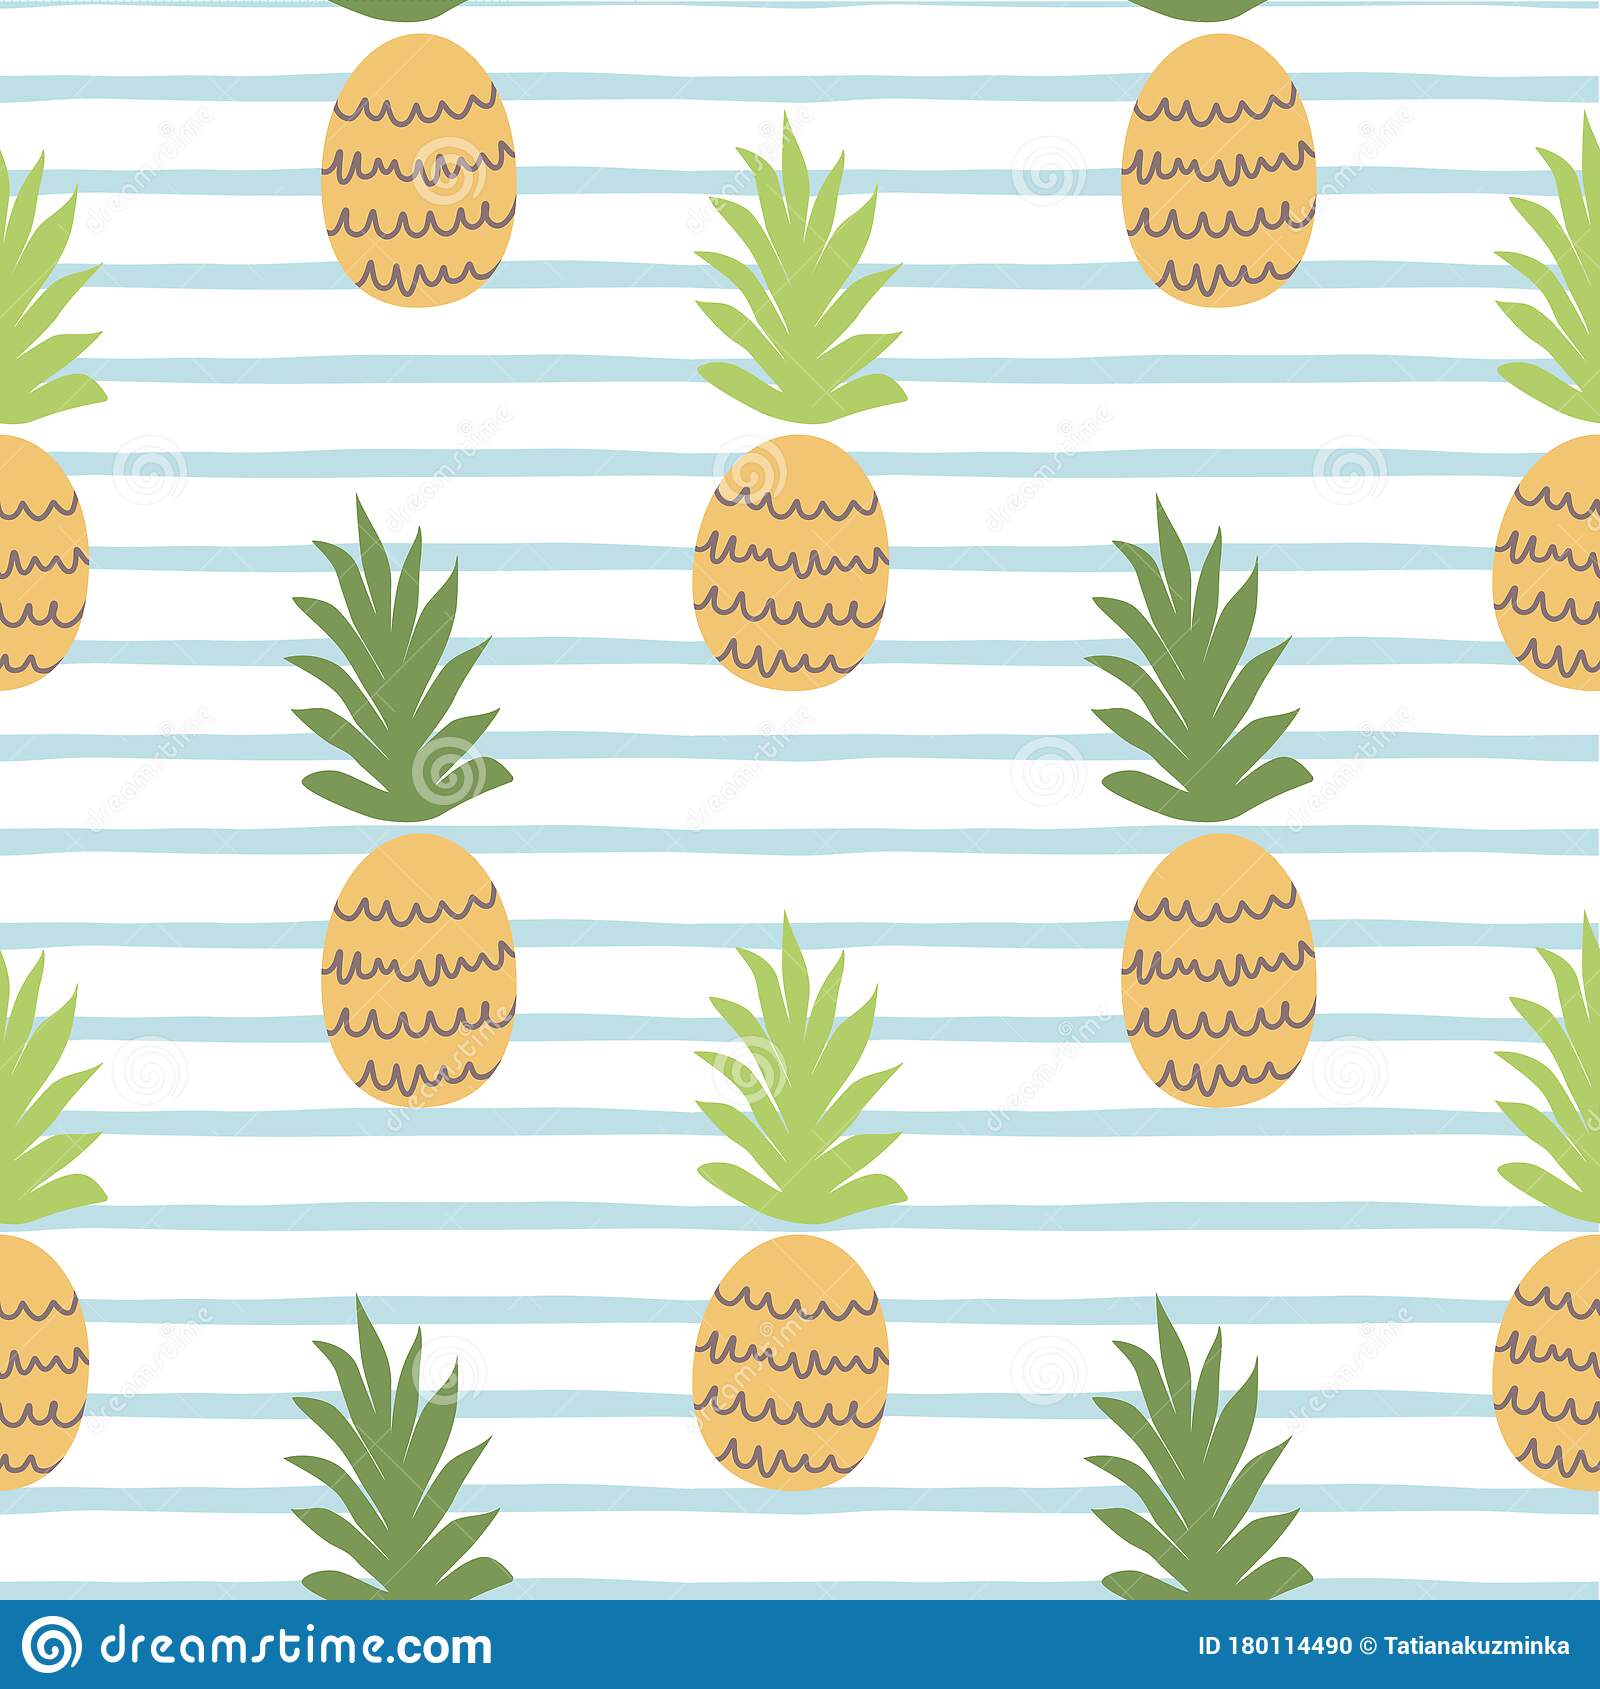 Beach summer pattern with pineapple cute tropical fruit on blue lines seamless background fabric textile striped design stock illustration